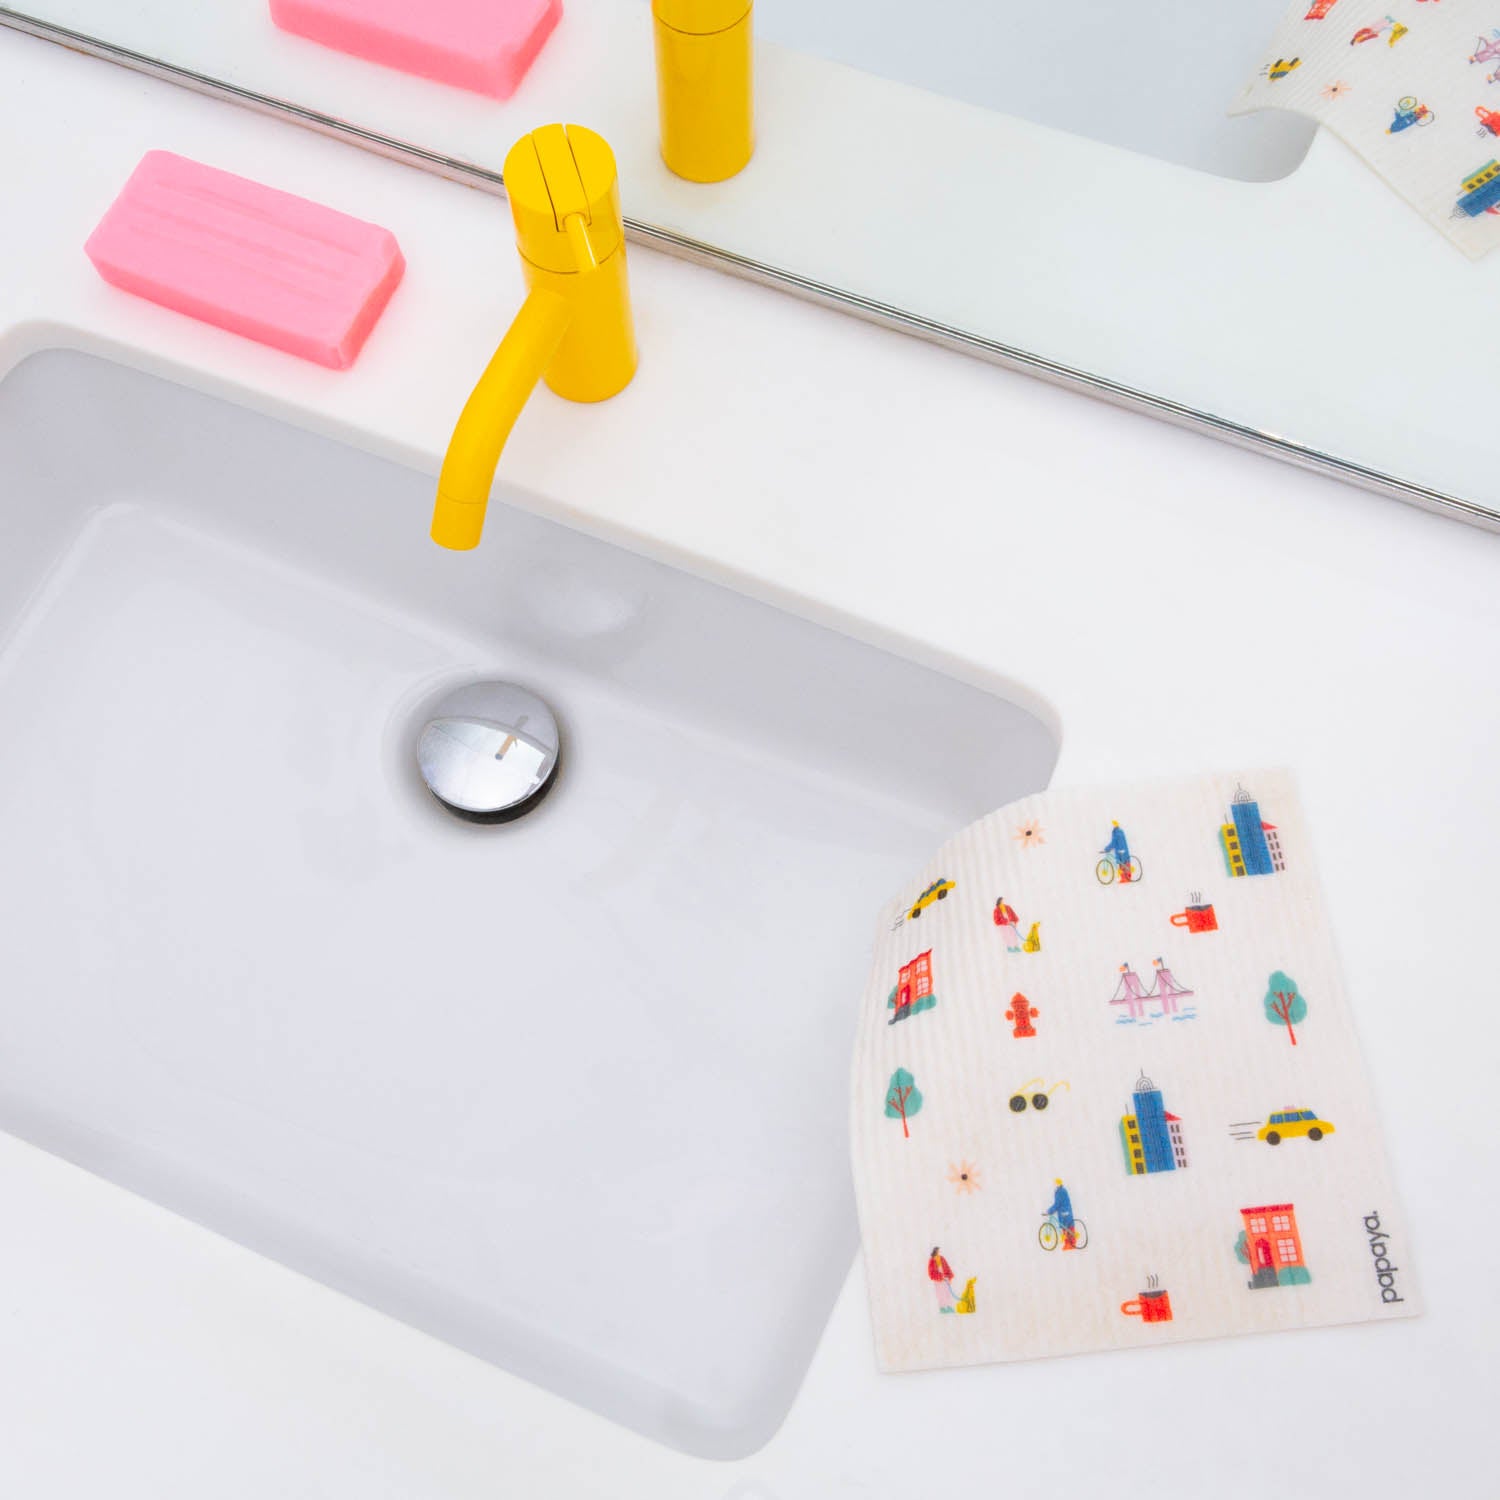 Reusable paper towel with city pattern design hanging over a white sink with a yellow faucet and pink bar of soap